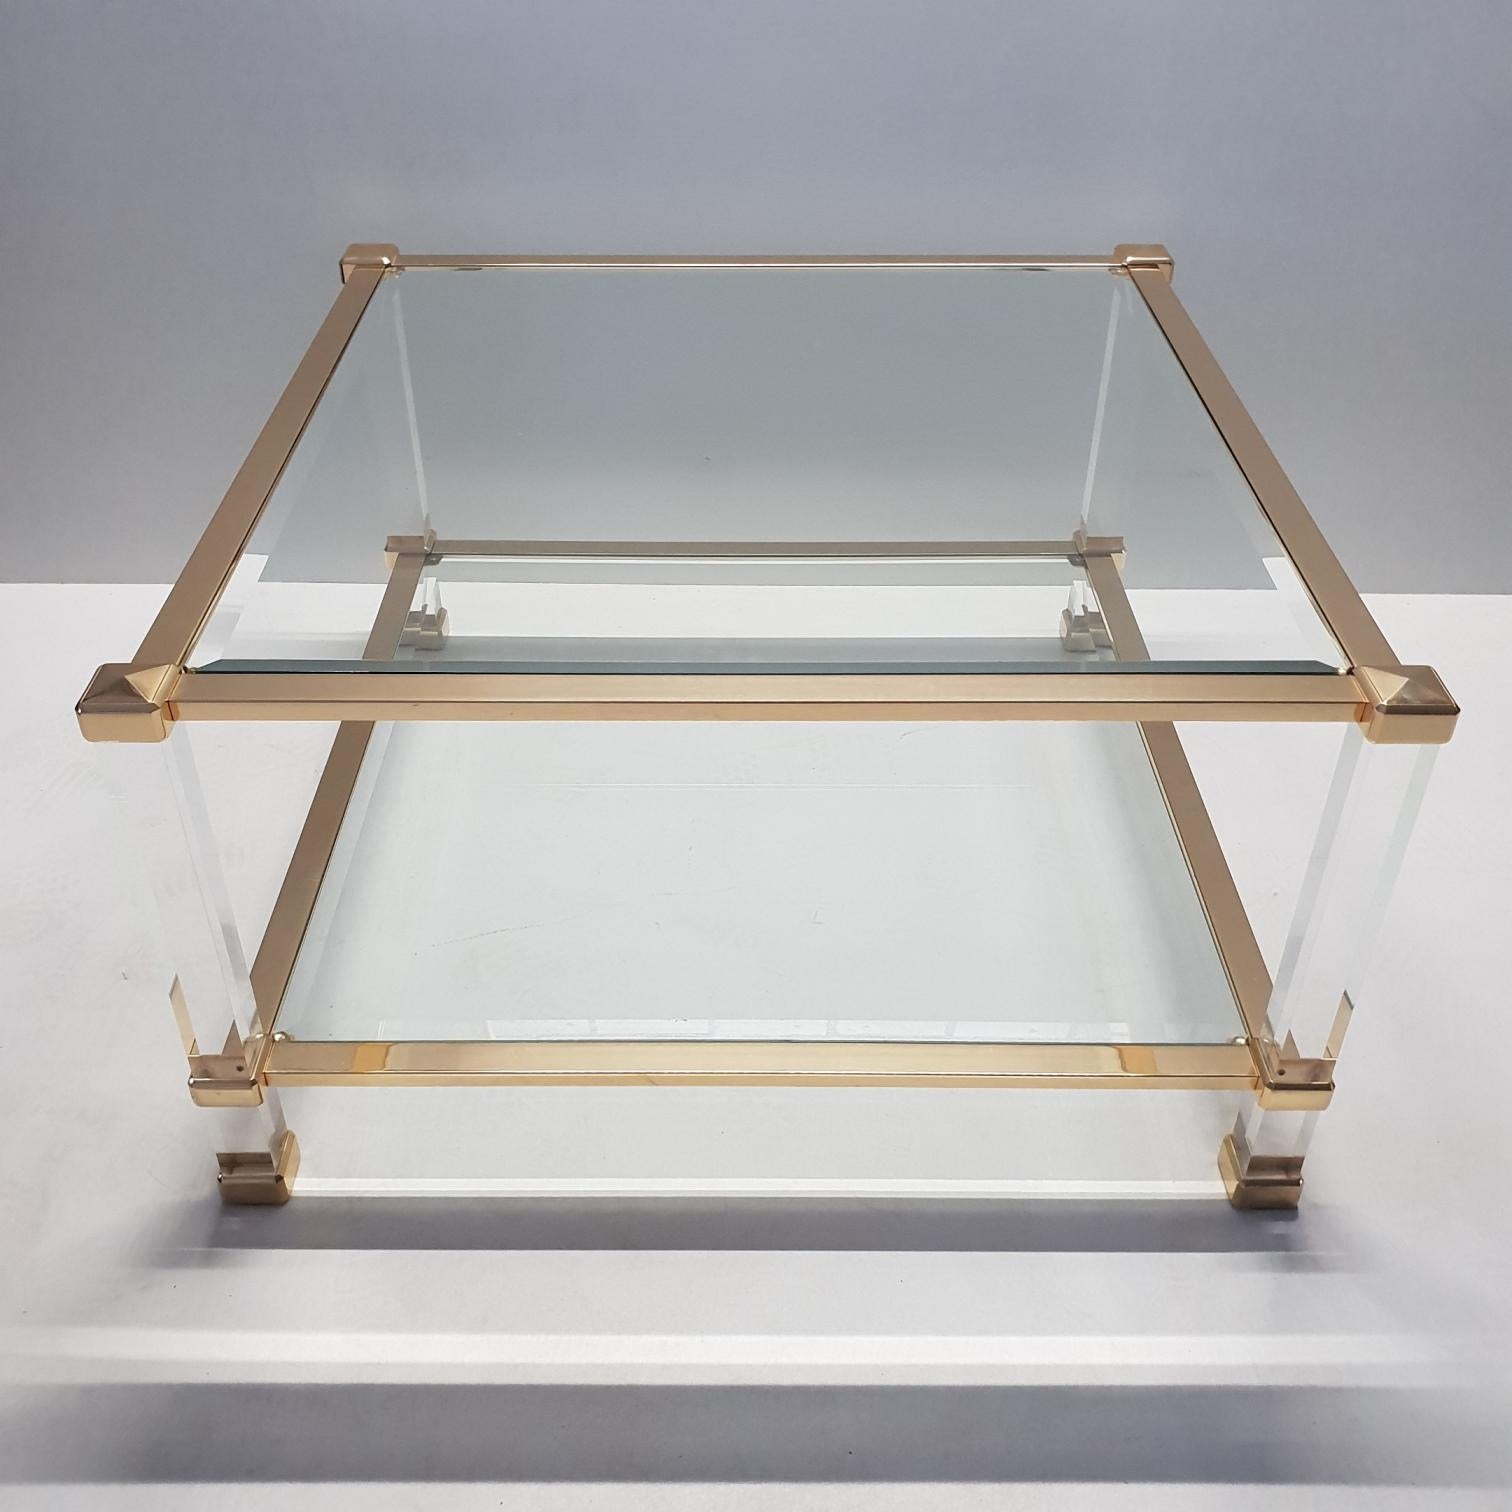 Italian Lucite and brass square coffee table by Orsenigo (marked), 1970s
Unique.

Orsenigo Furniture History - The company was founded in 1960 in Italy by the Orsenigo family, and continues to operate today north of Milan. The high end furniture